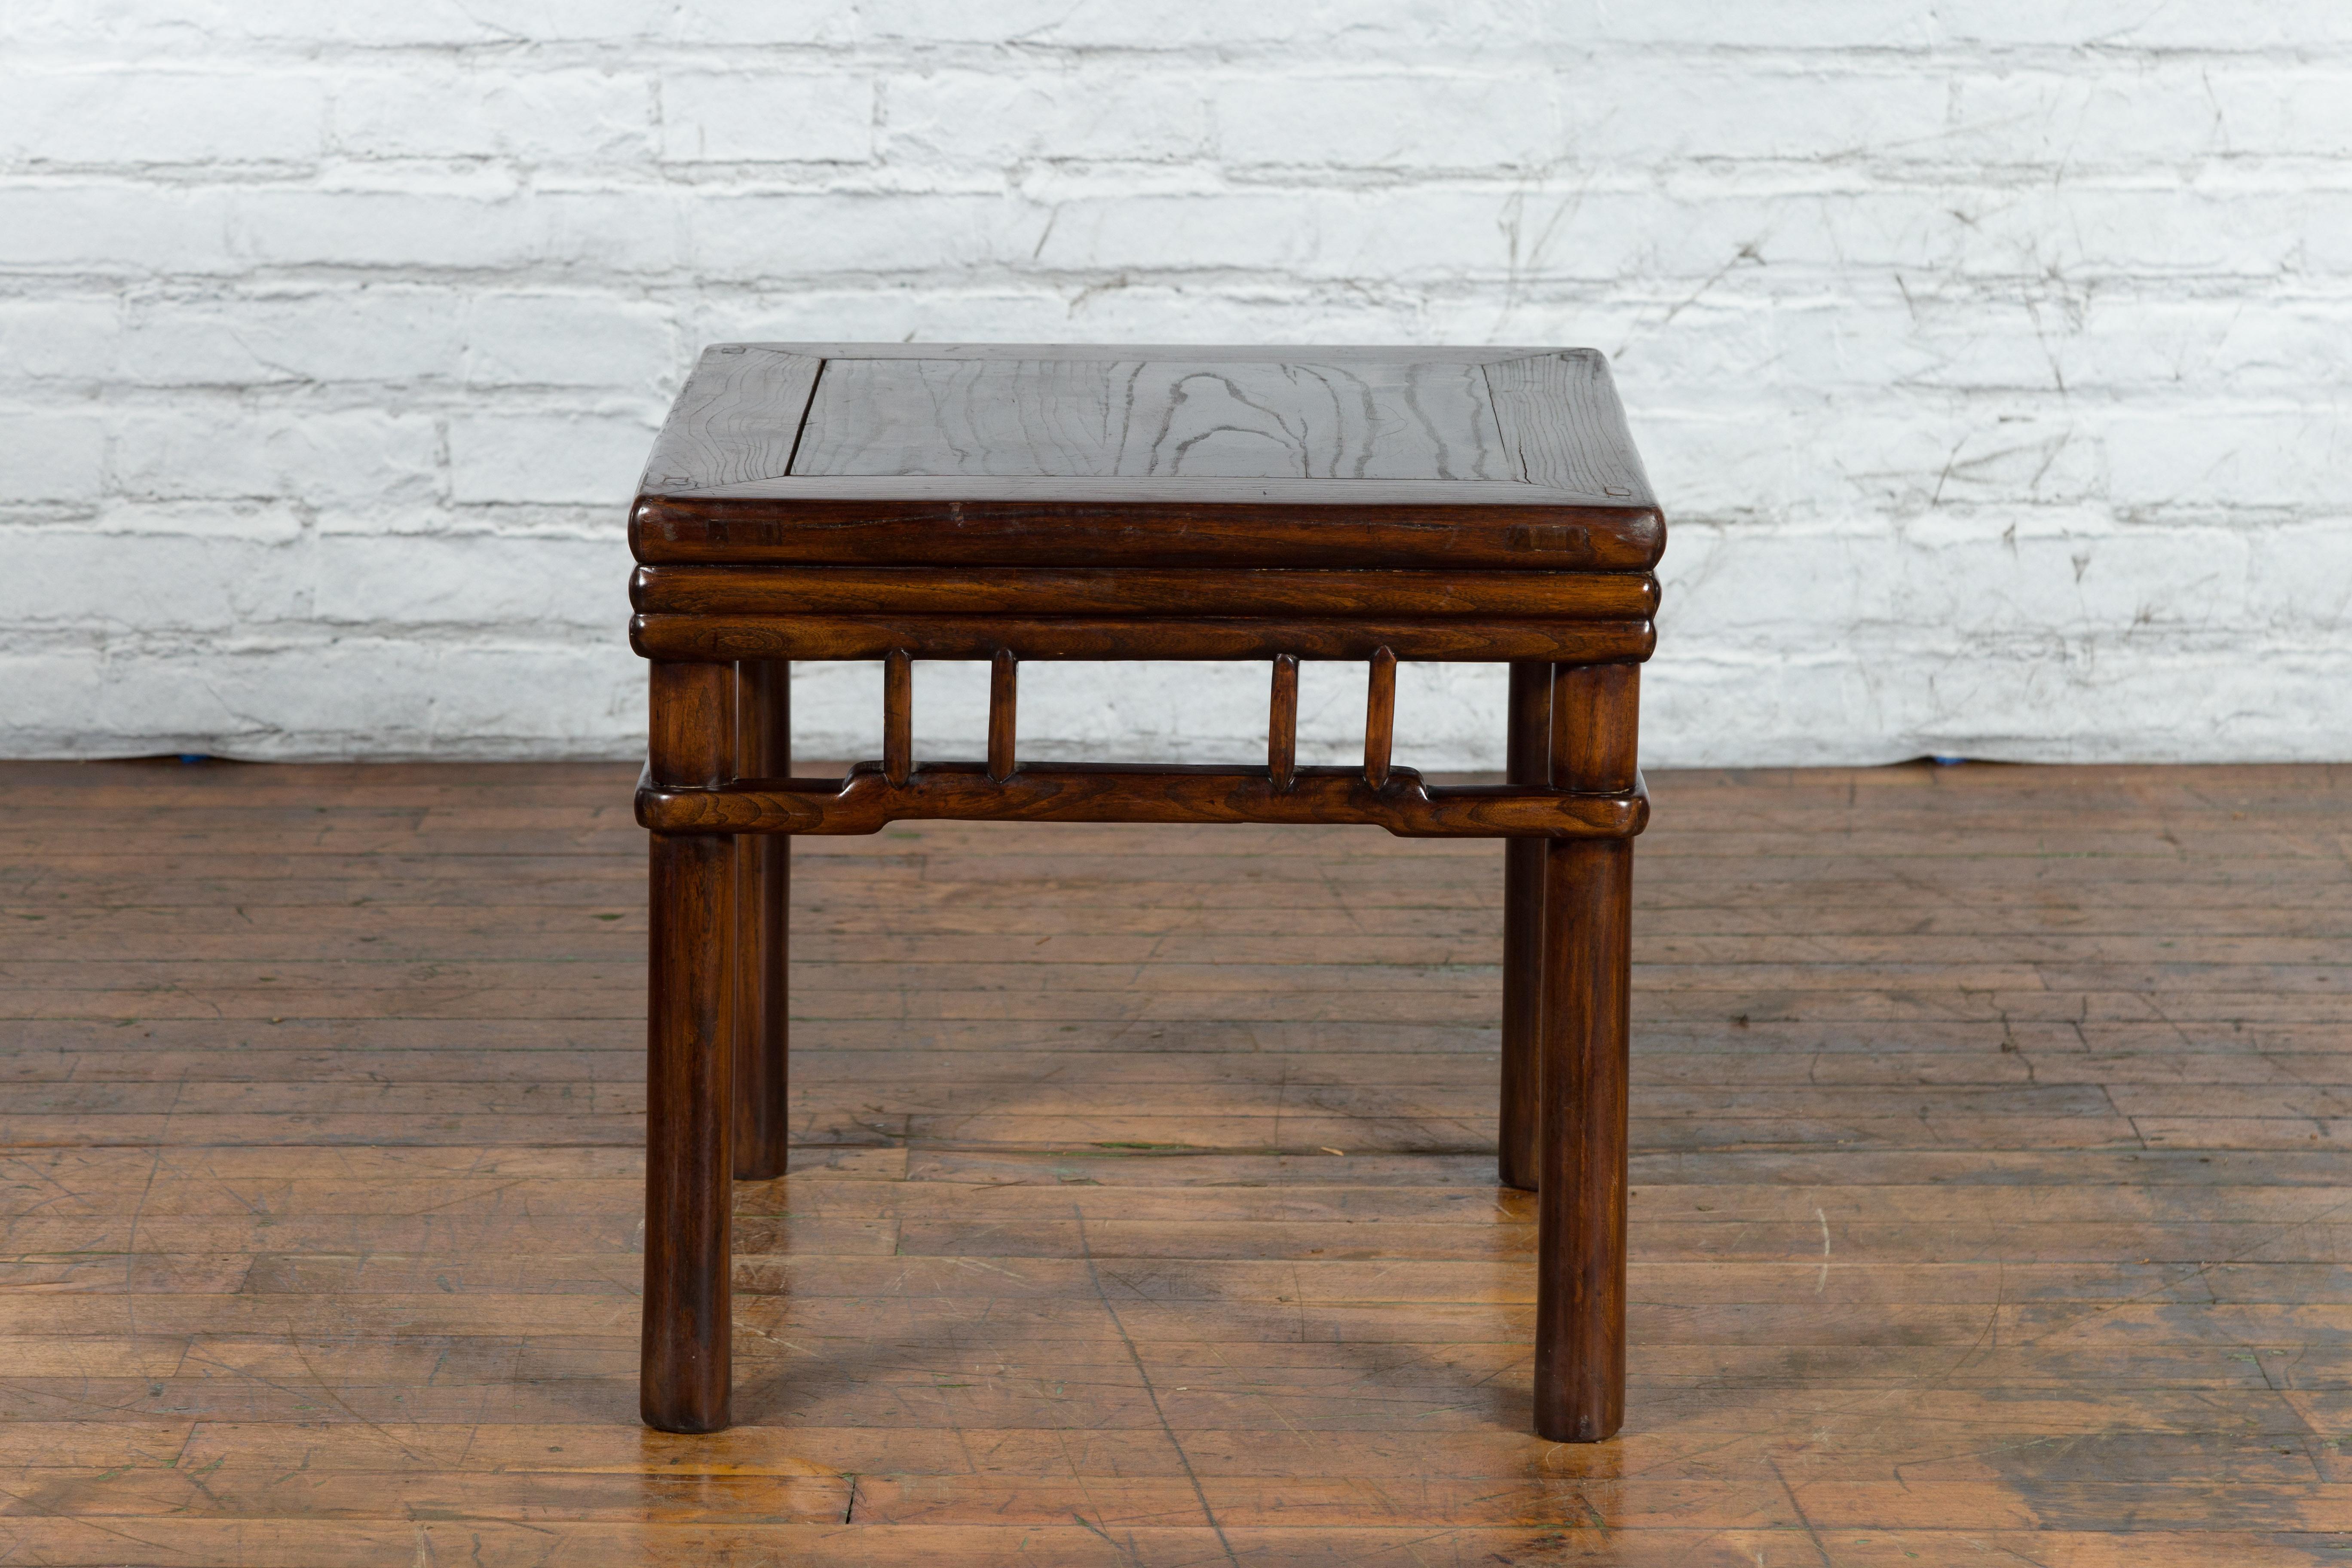 An antique Chinese Ming Dynasty style brown wooden side table from the early 20th century, with reeded apron, pillar strut motifs, hump back stretchers and cylindrical legs. Created in China during the early years of the 20th century, this Ming